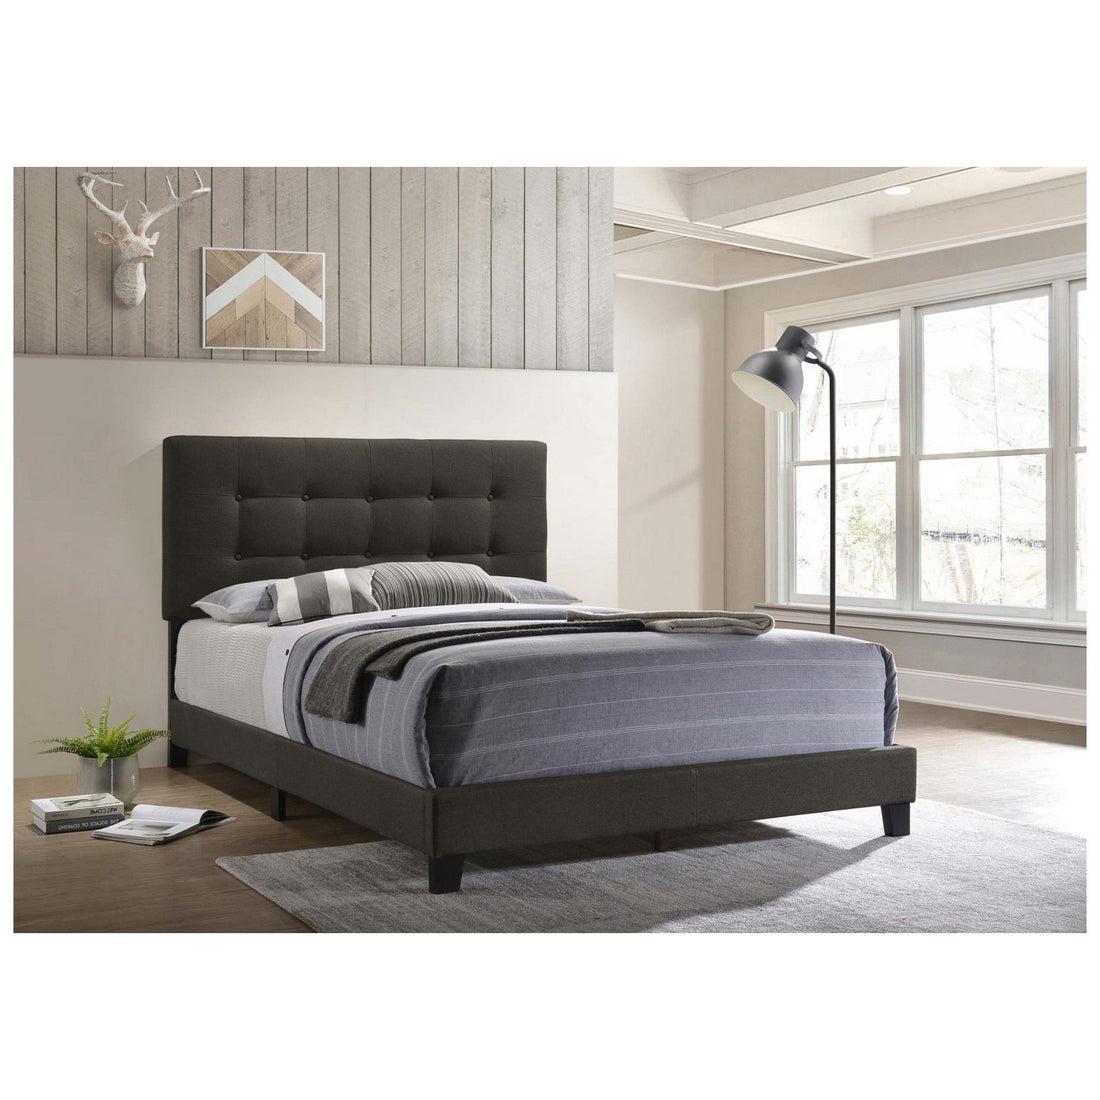 Mapes Tufted Upholstered Queen Bed Charcoal 305746Q